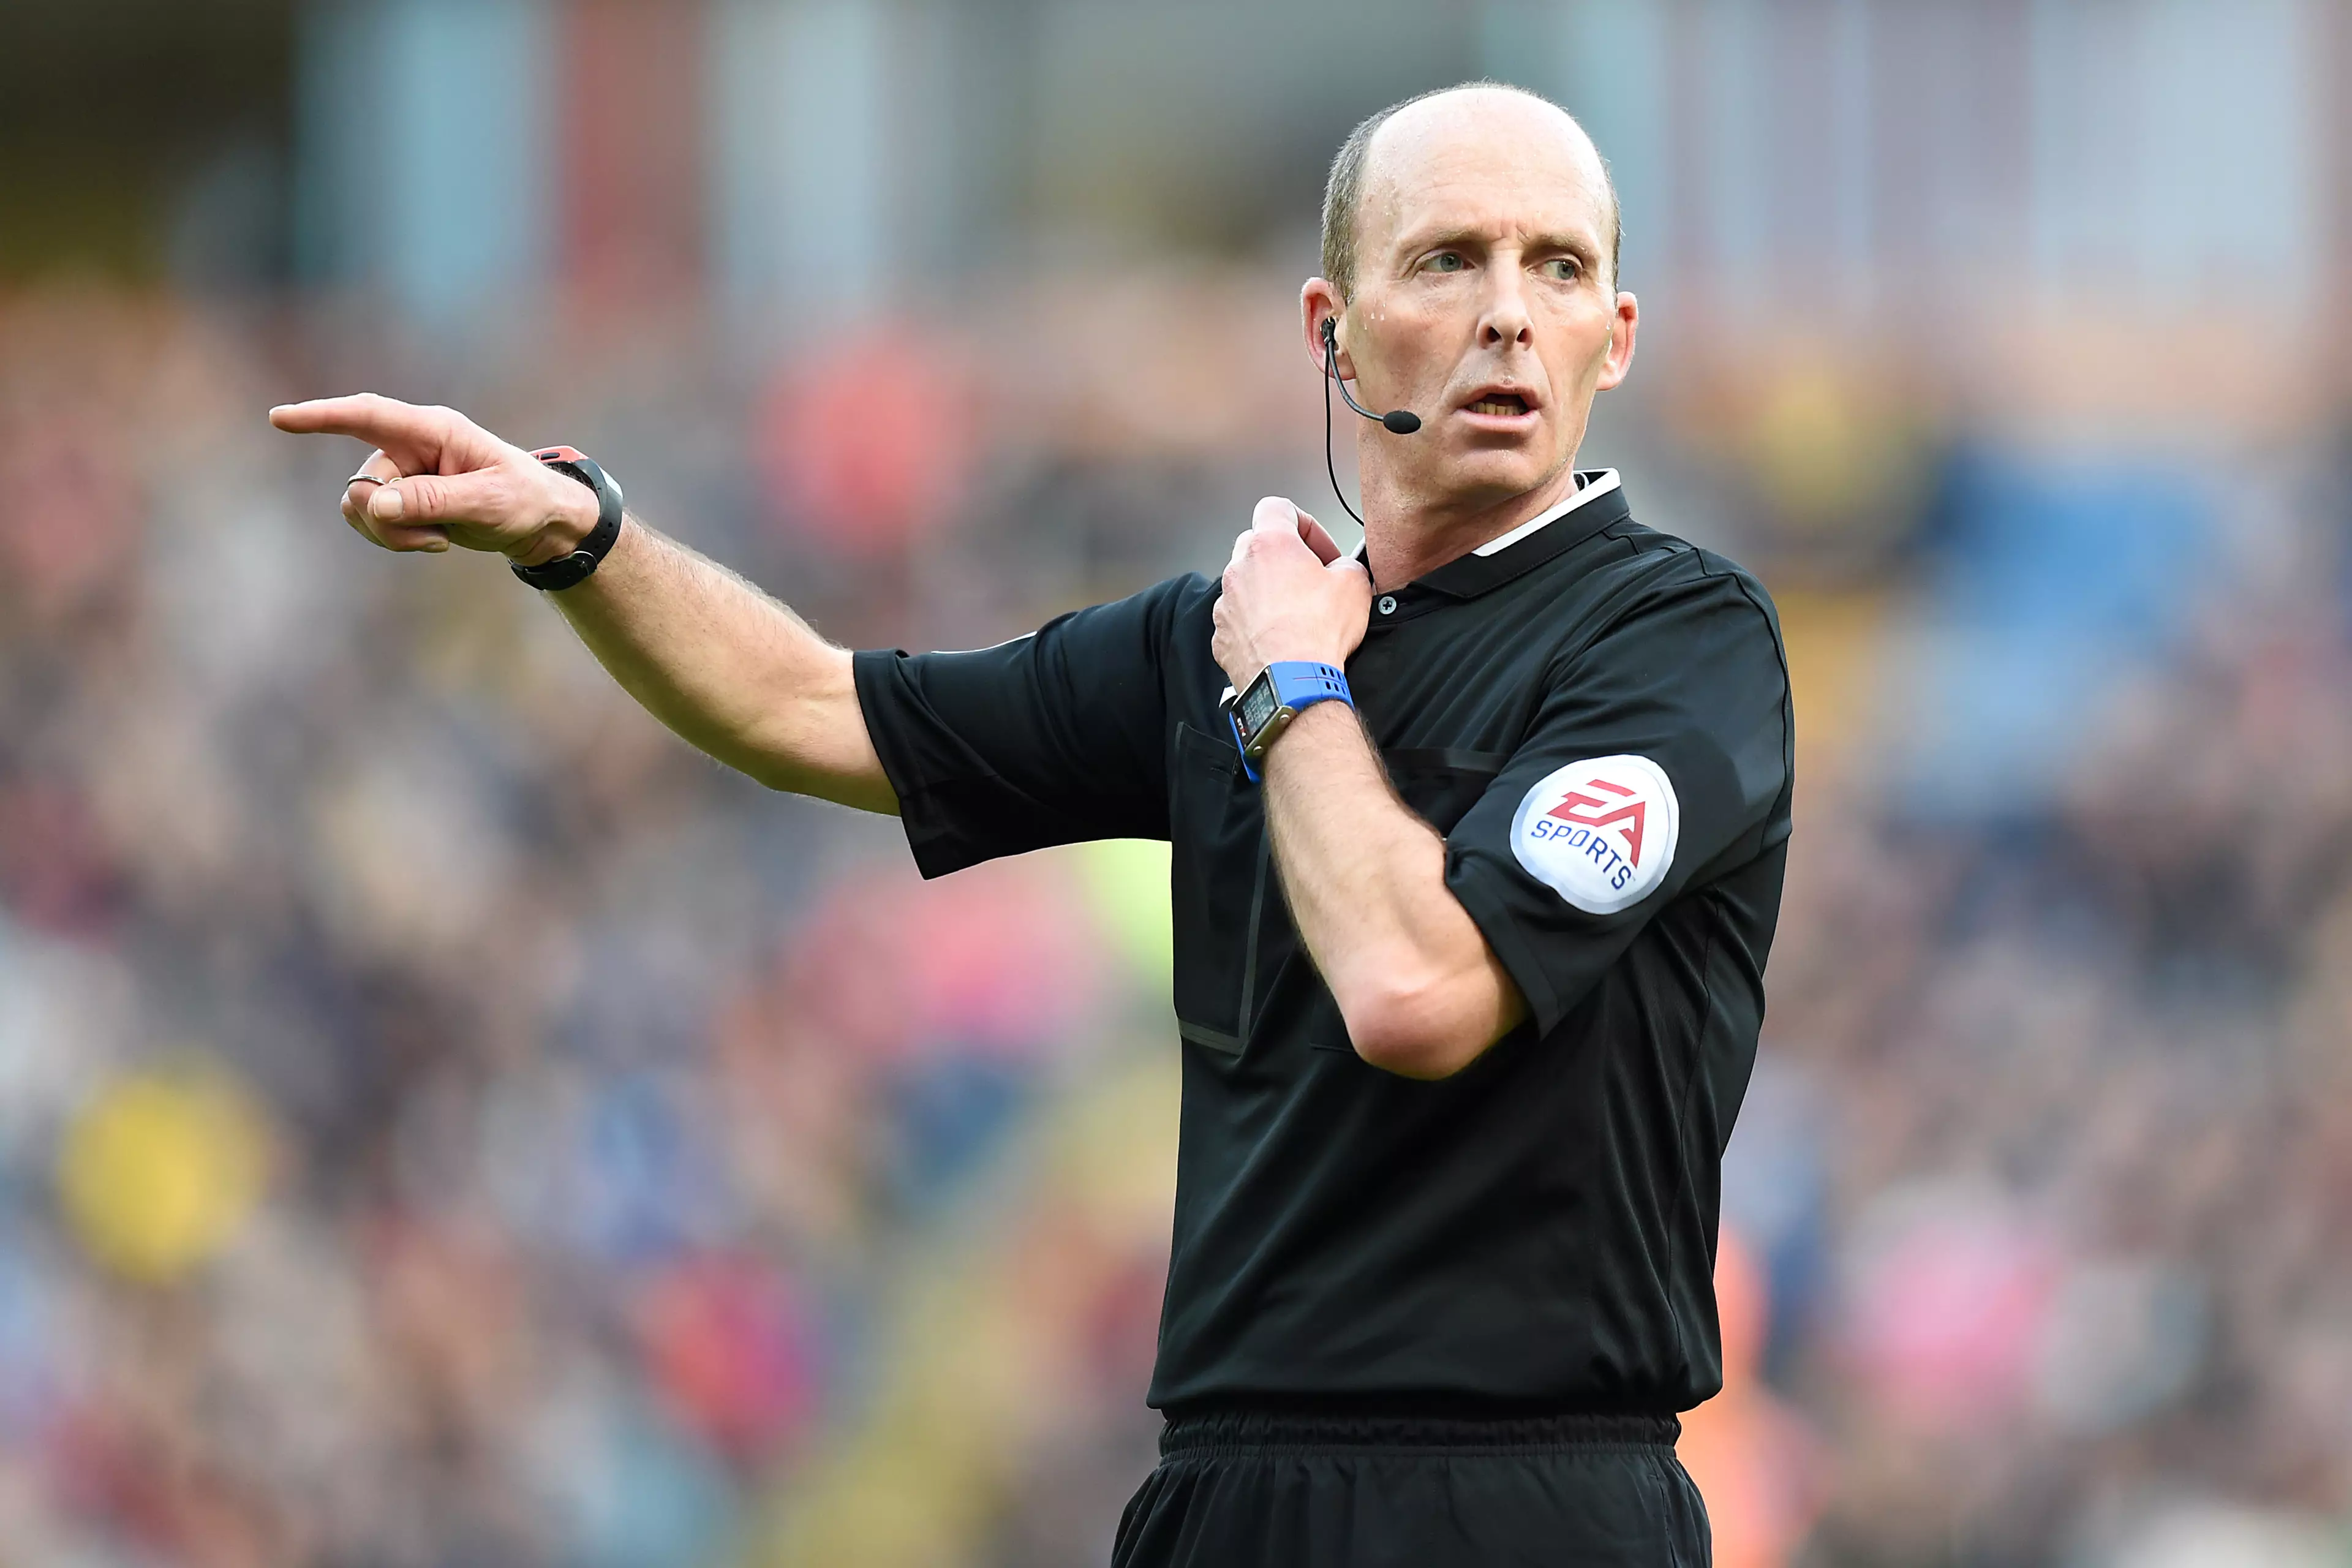 WATCH: Mike Dean Produced Some Hilarious Moments During Southampton vs Spurs